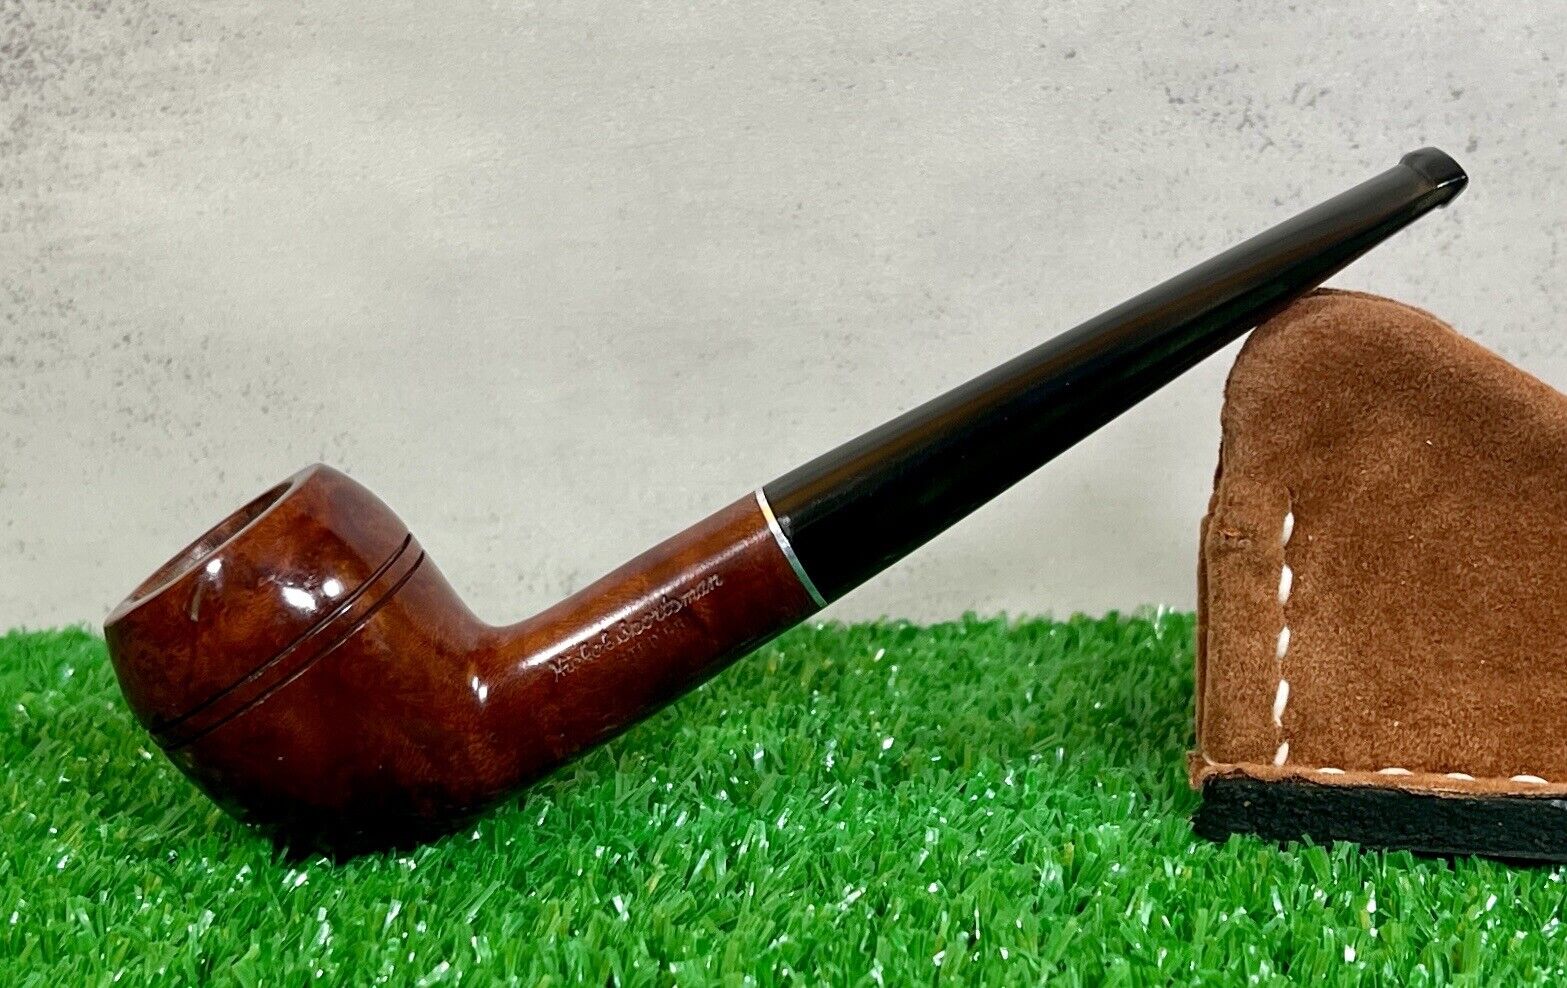 Hickok (Hilson) Sportsman Small Rhodesian Vintage Pipe In Excellent Condition.